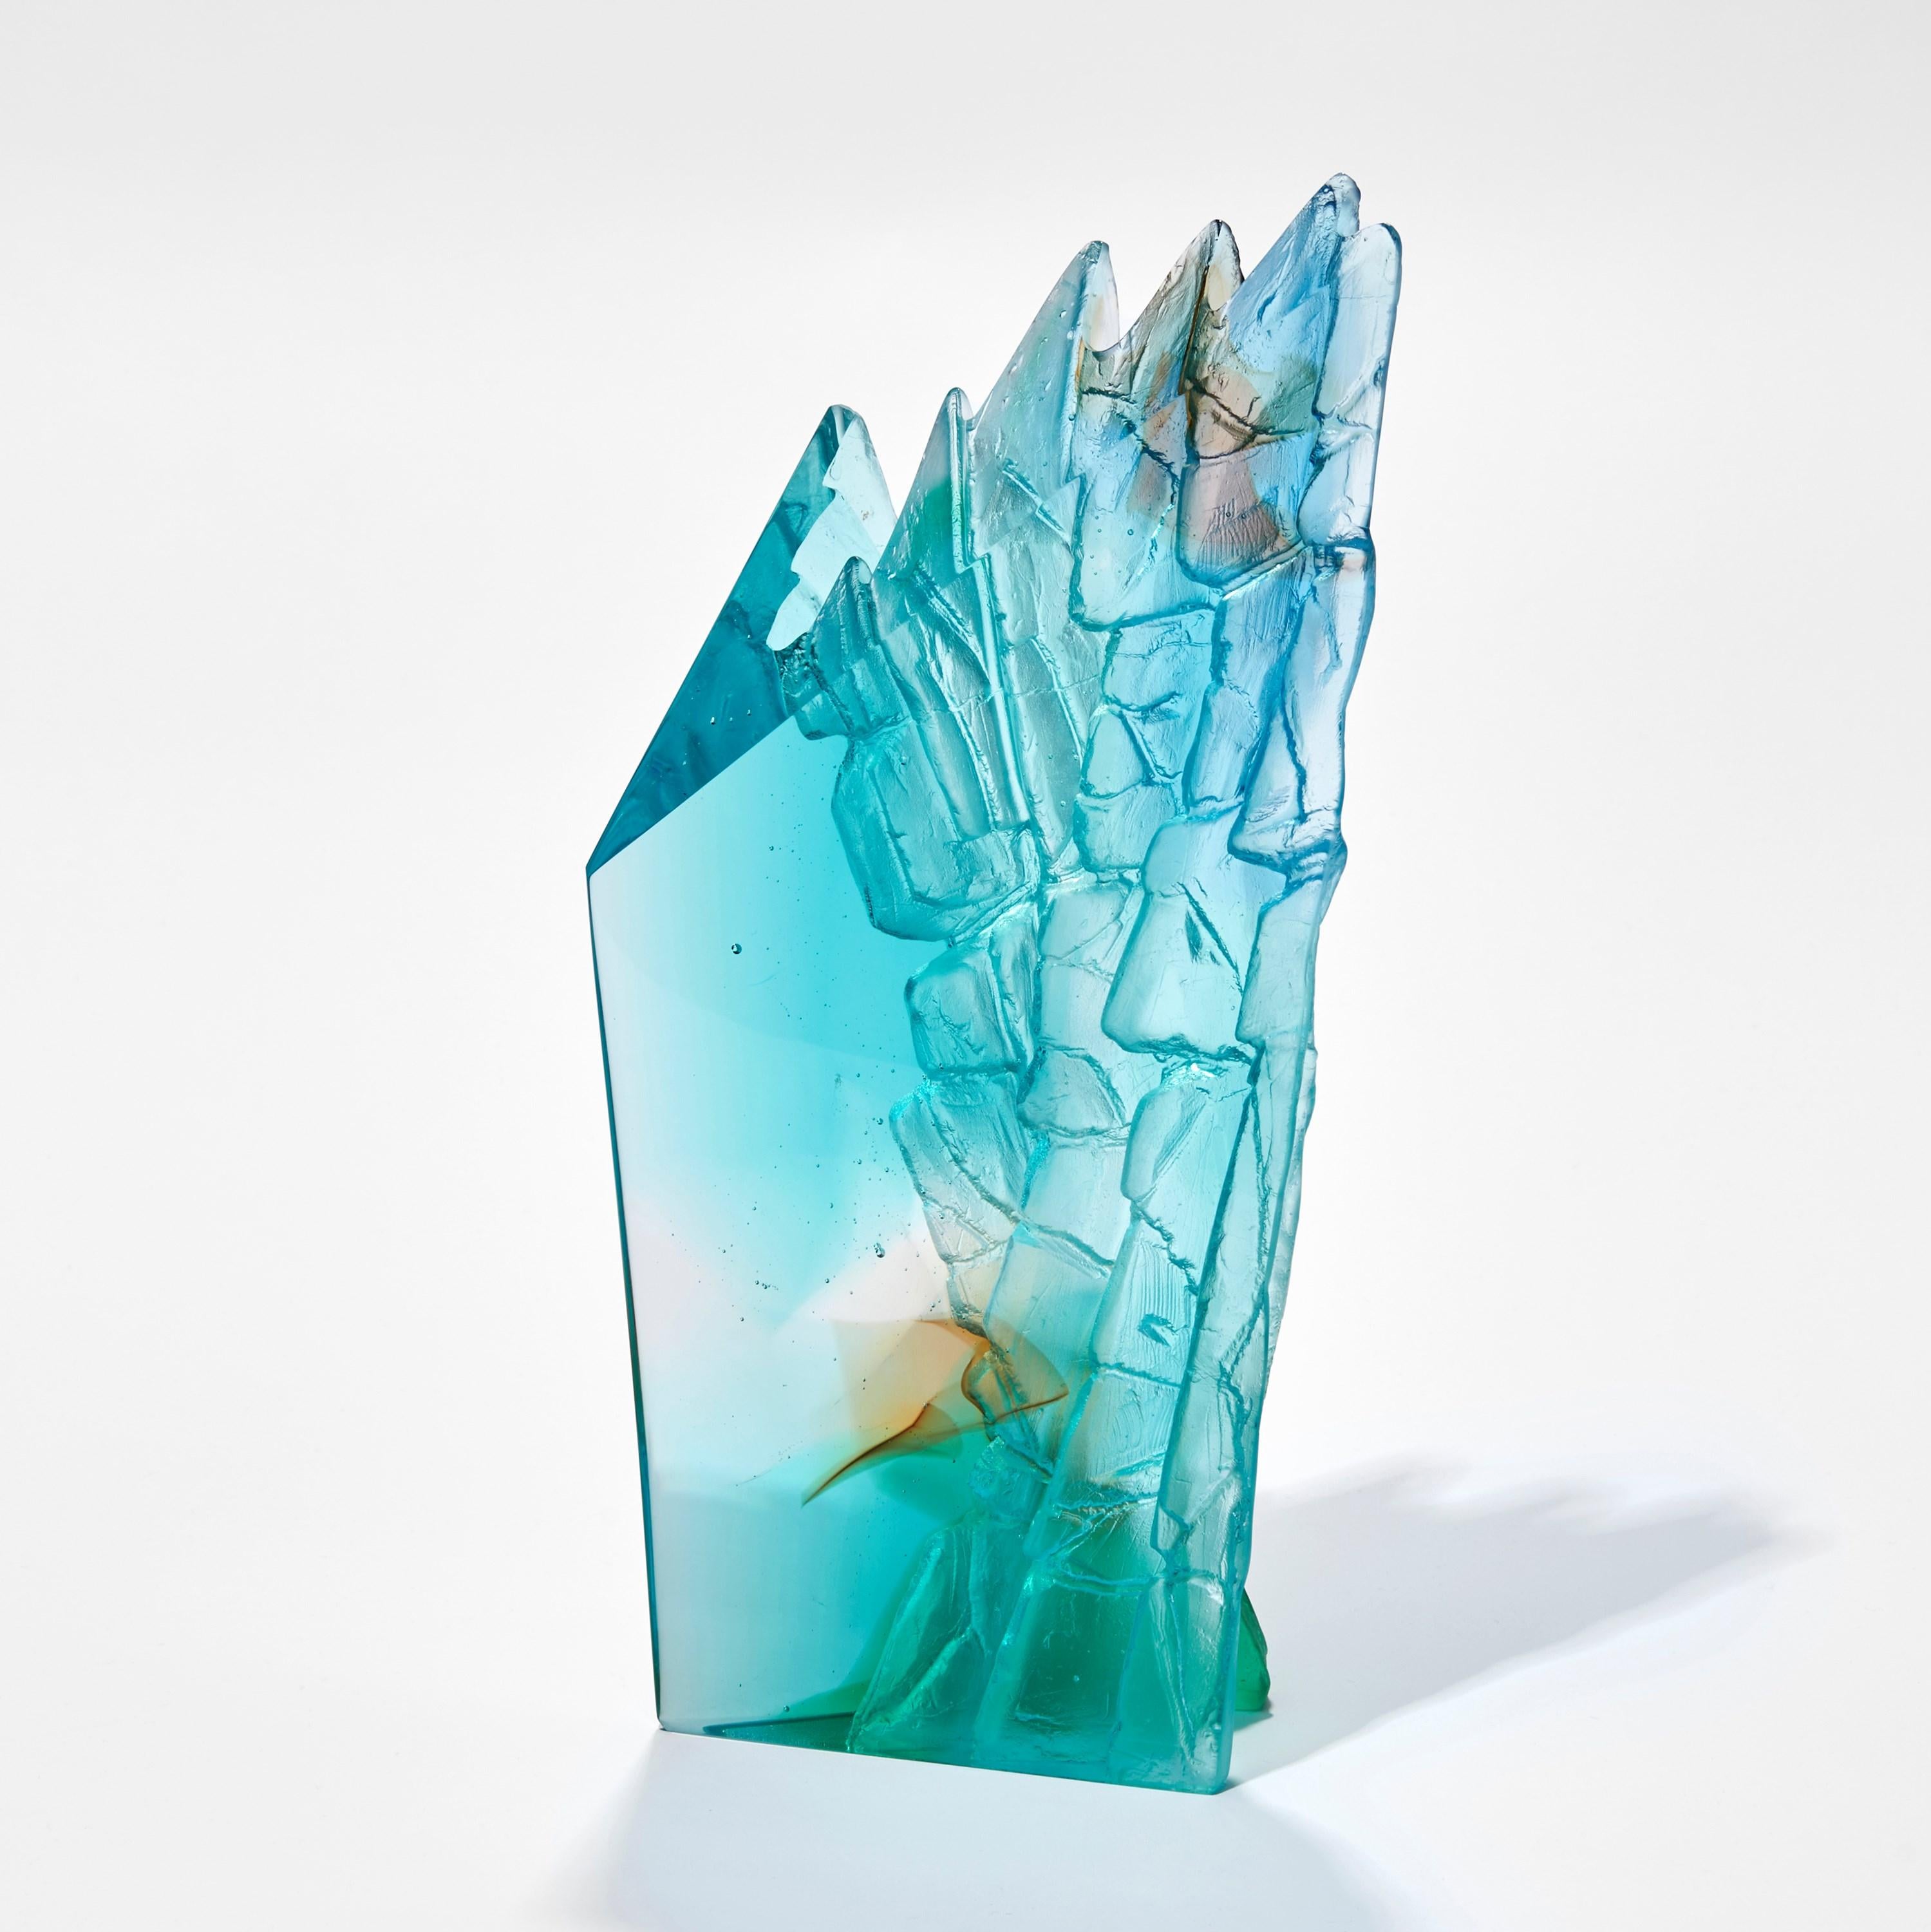 'Turquoise Cliff II' is a unique cast glass sculpture by the British artist, Crispian Heath.

Crispian Heath's work is predominantly inspired by landscape and his love for exploring the rugged cliffs and other geological sites which are unique to